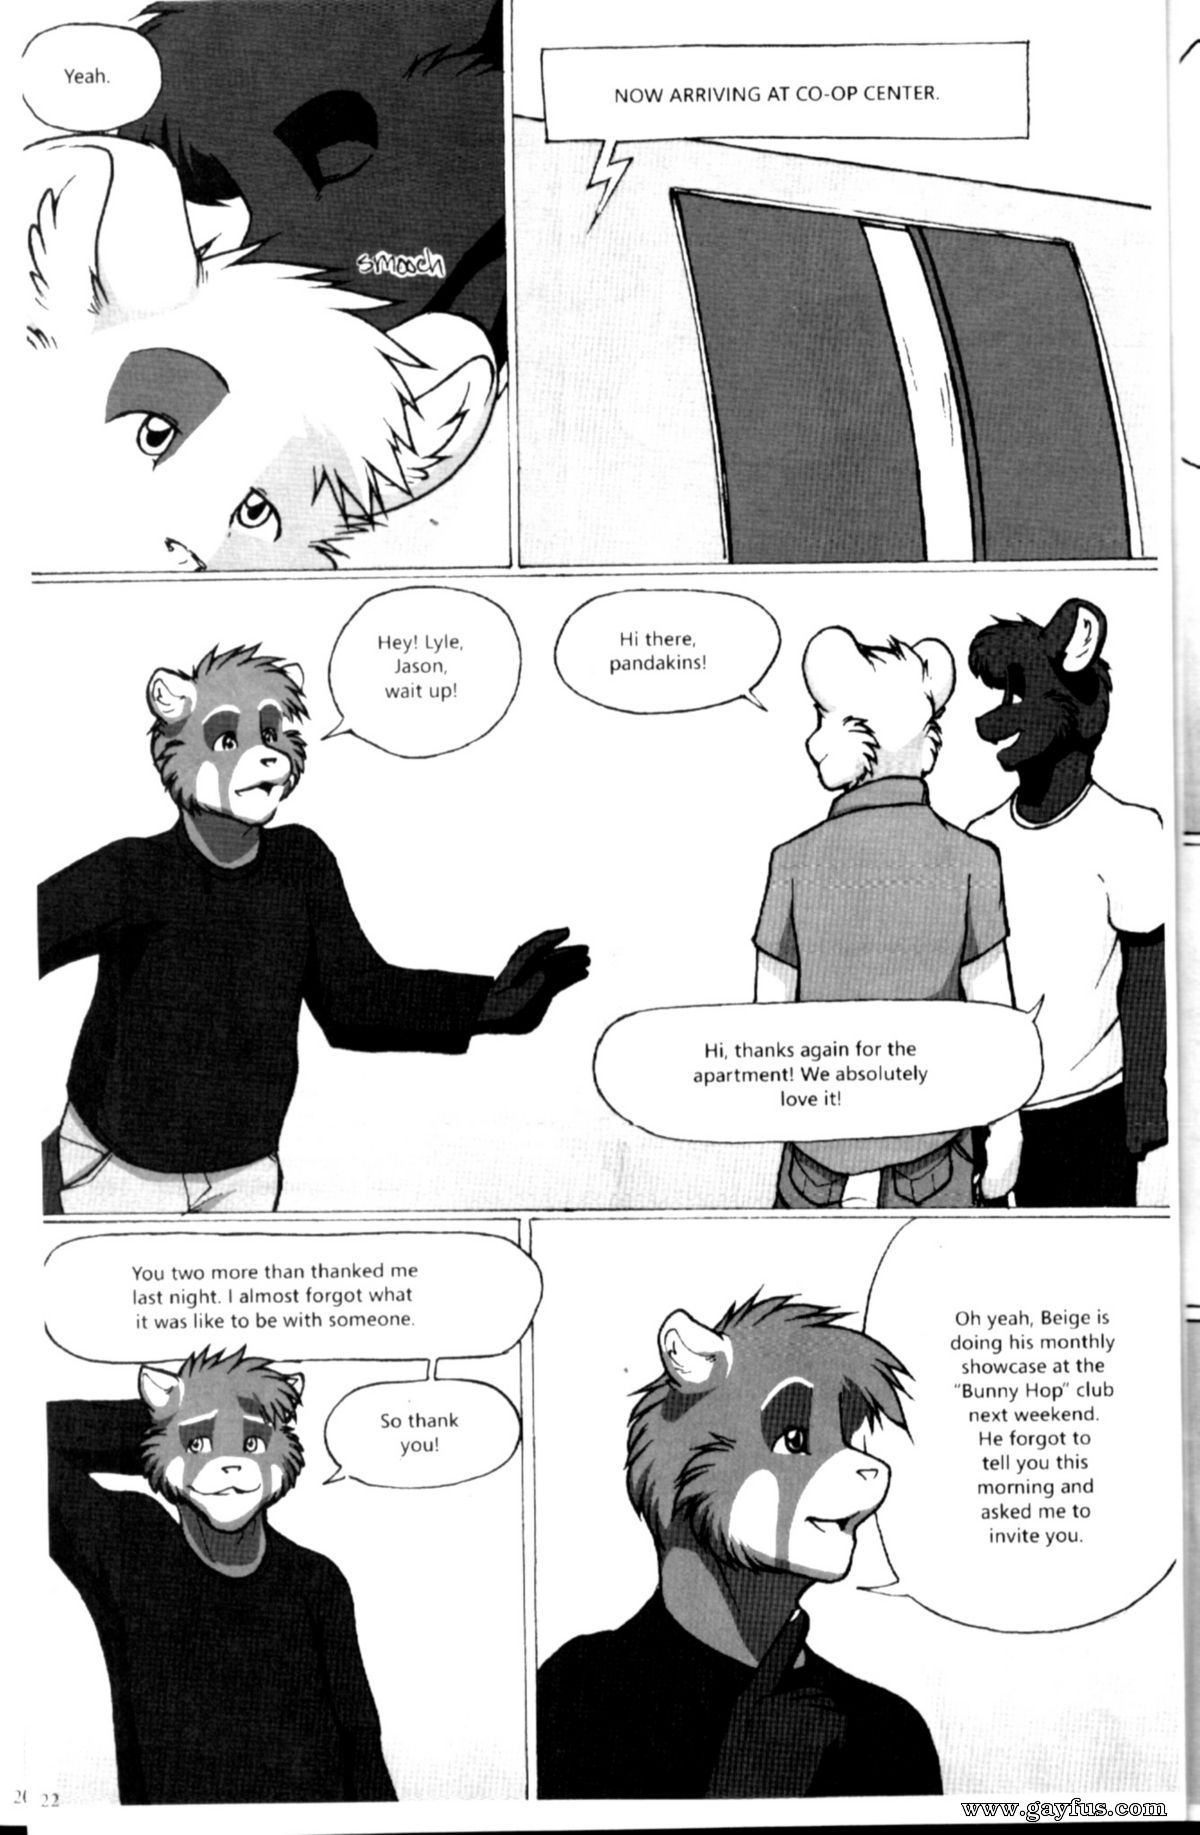 picture MovingIn_Page22.jpg